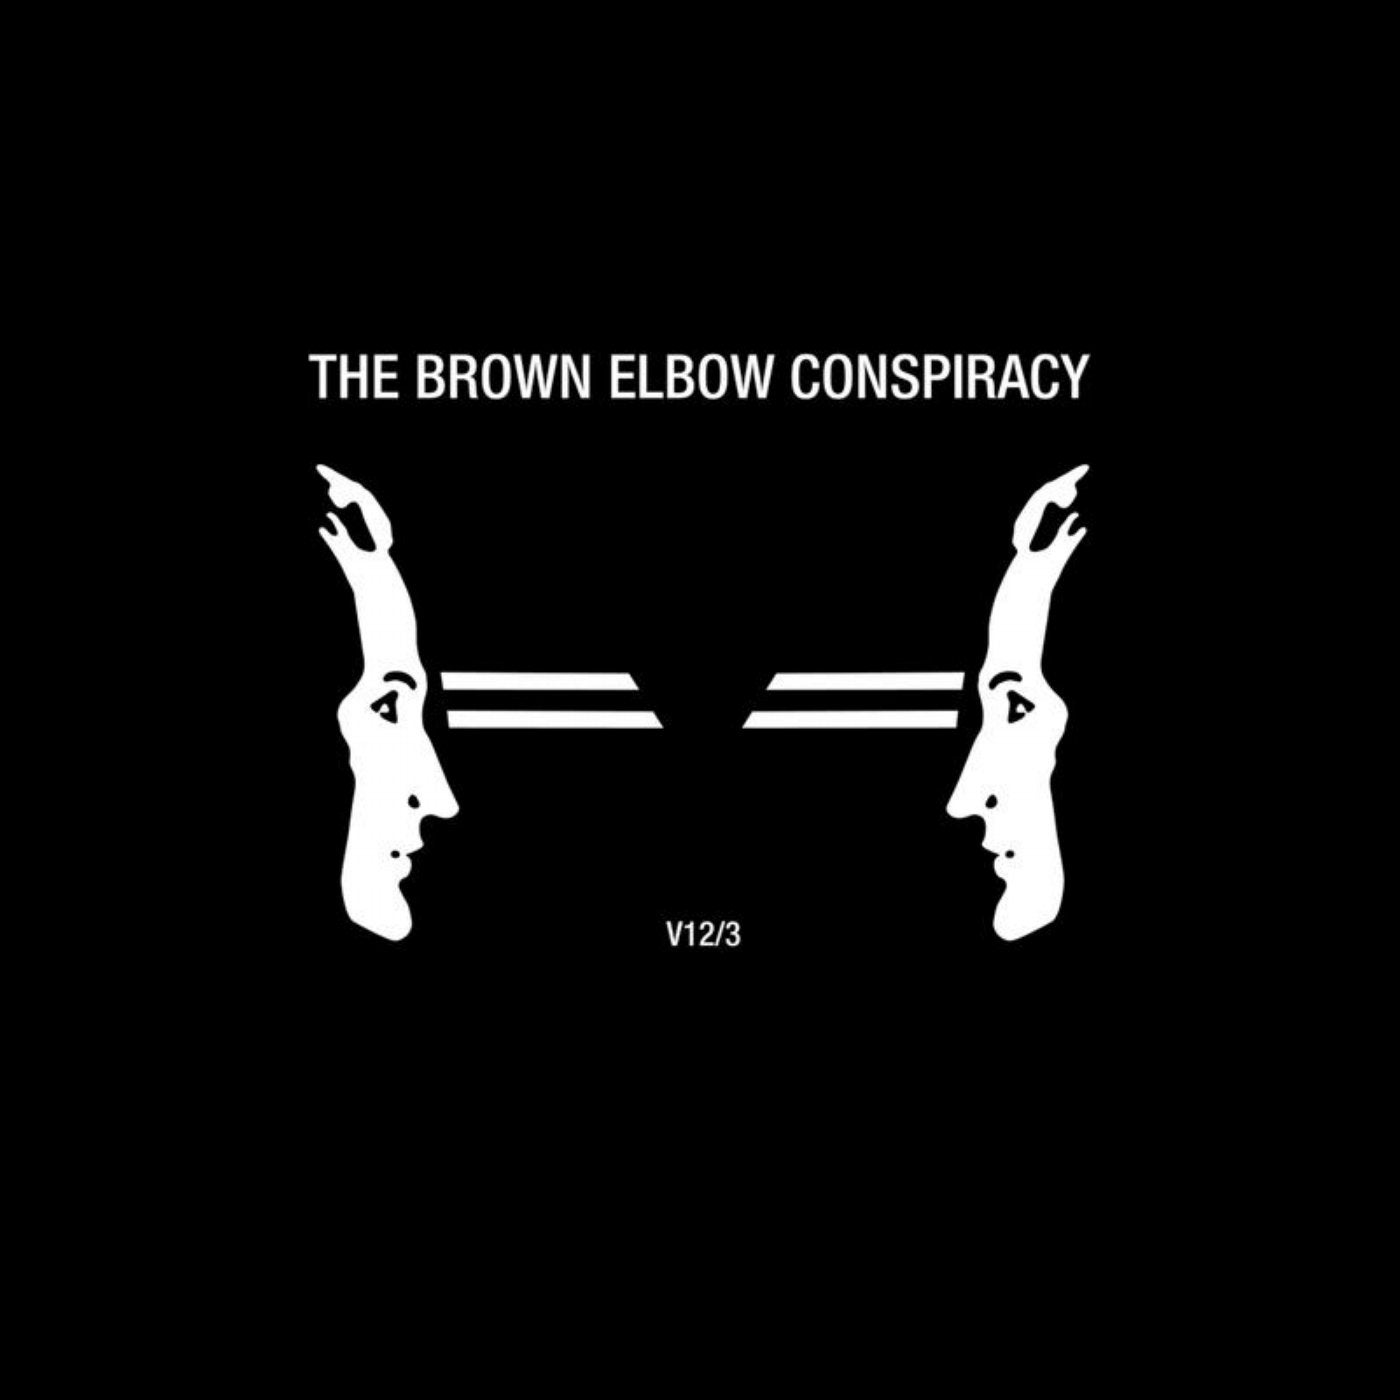 The Brown Elbow Conspiracy